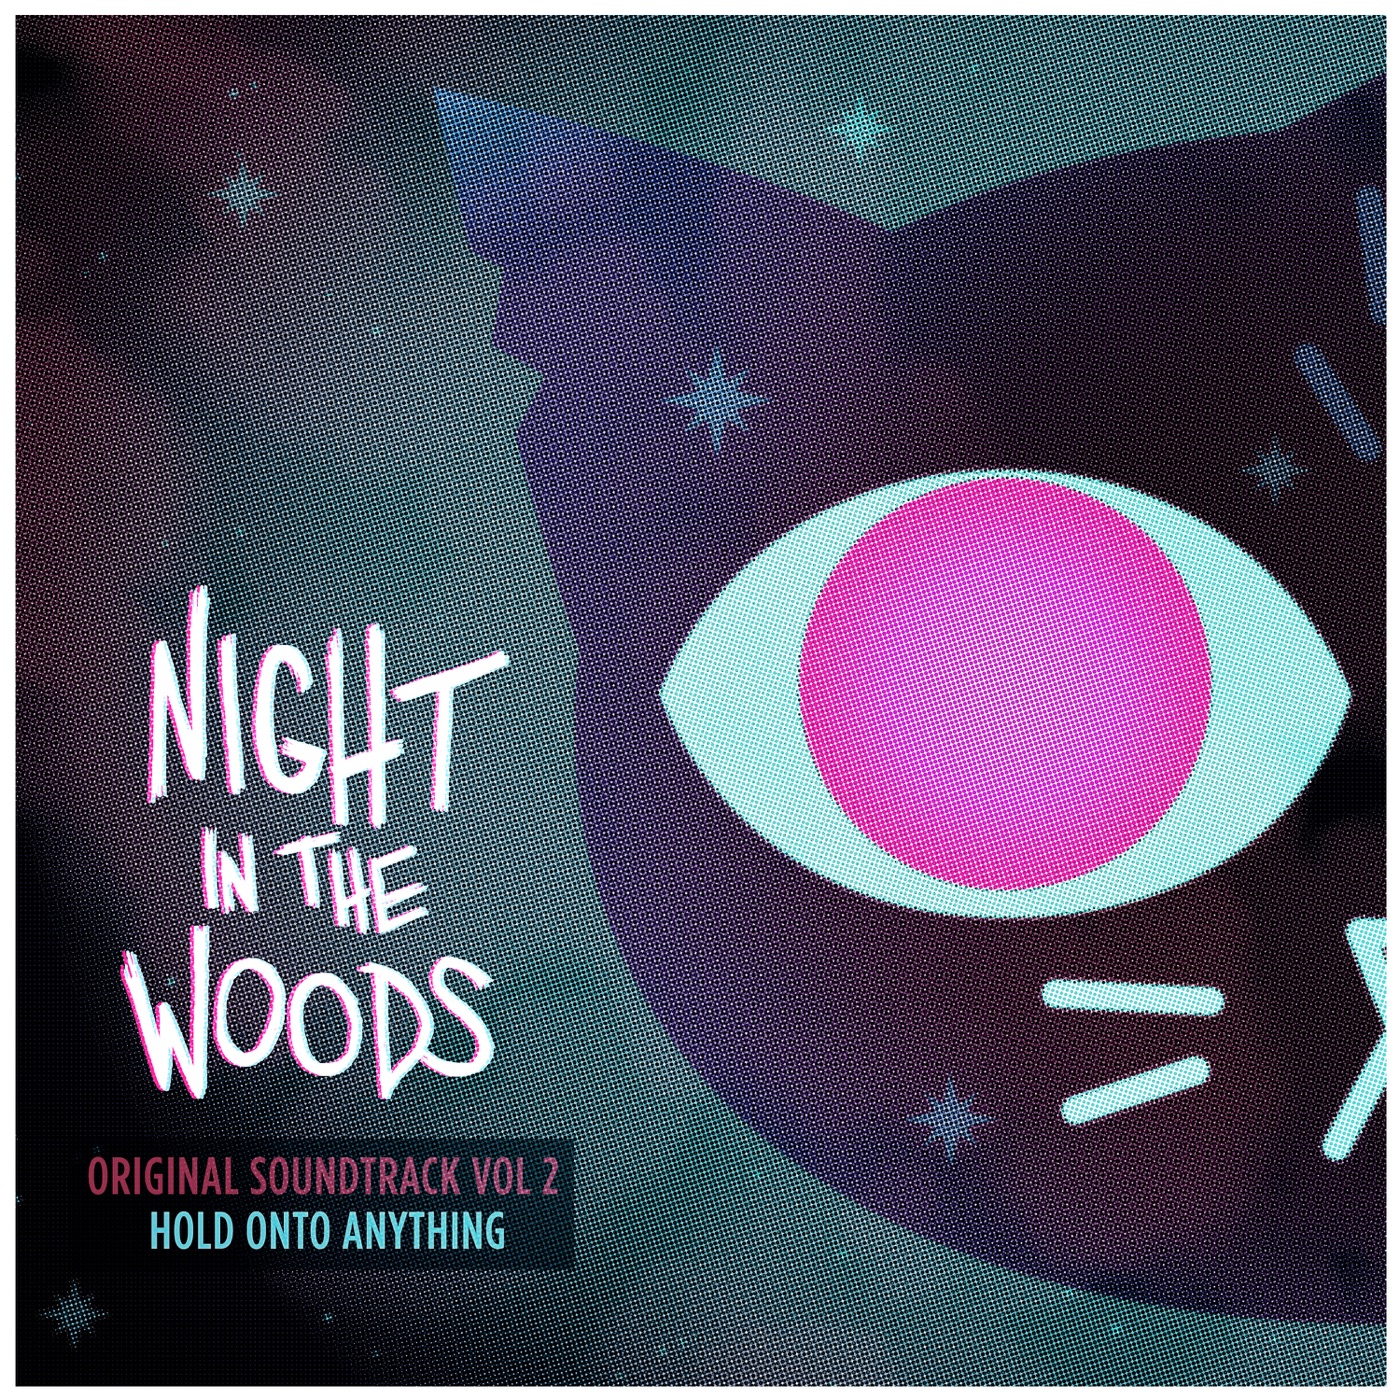 Night in the Woods (Original Soundtrack, Vol. 2) [Hold onto Anything] by Alec Holowka